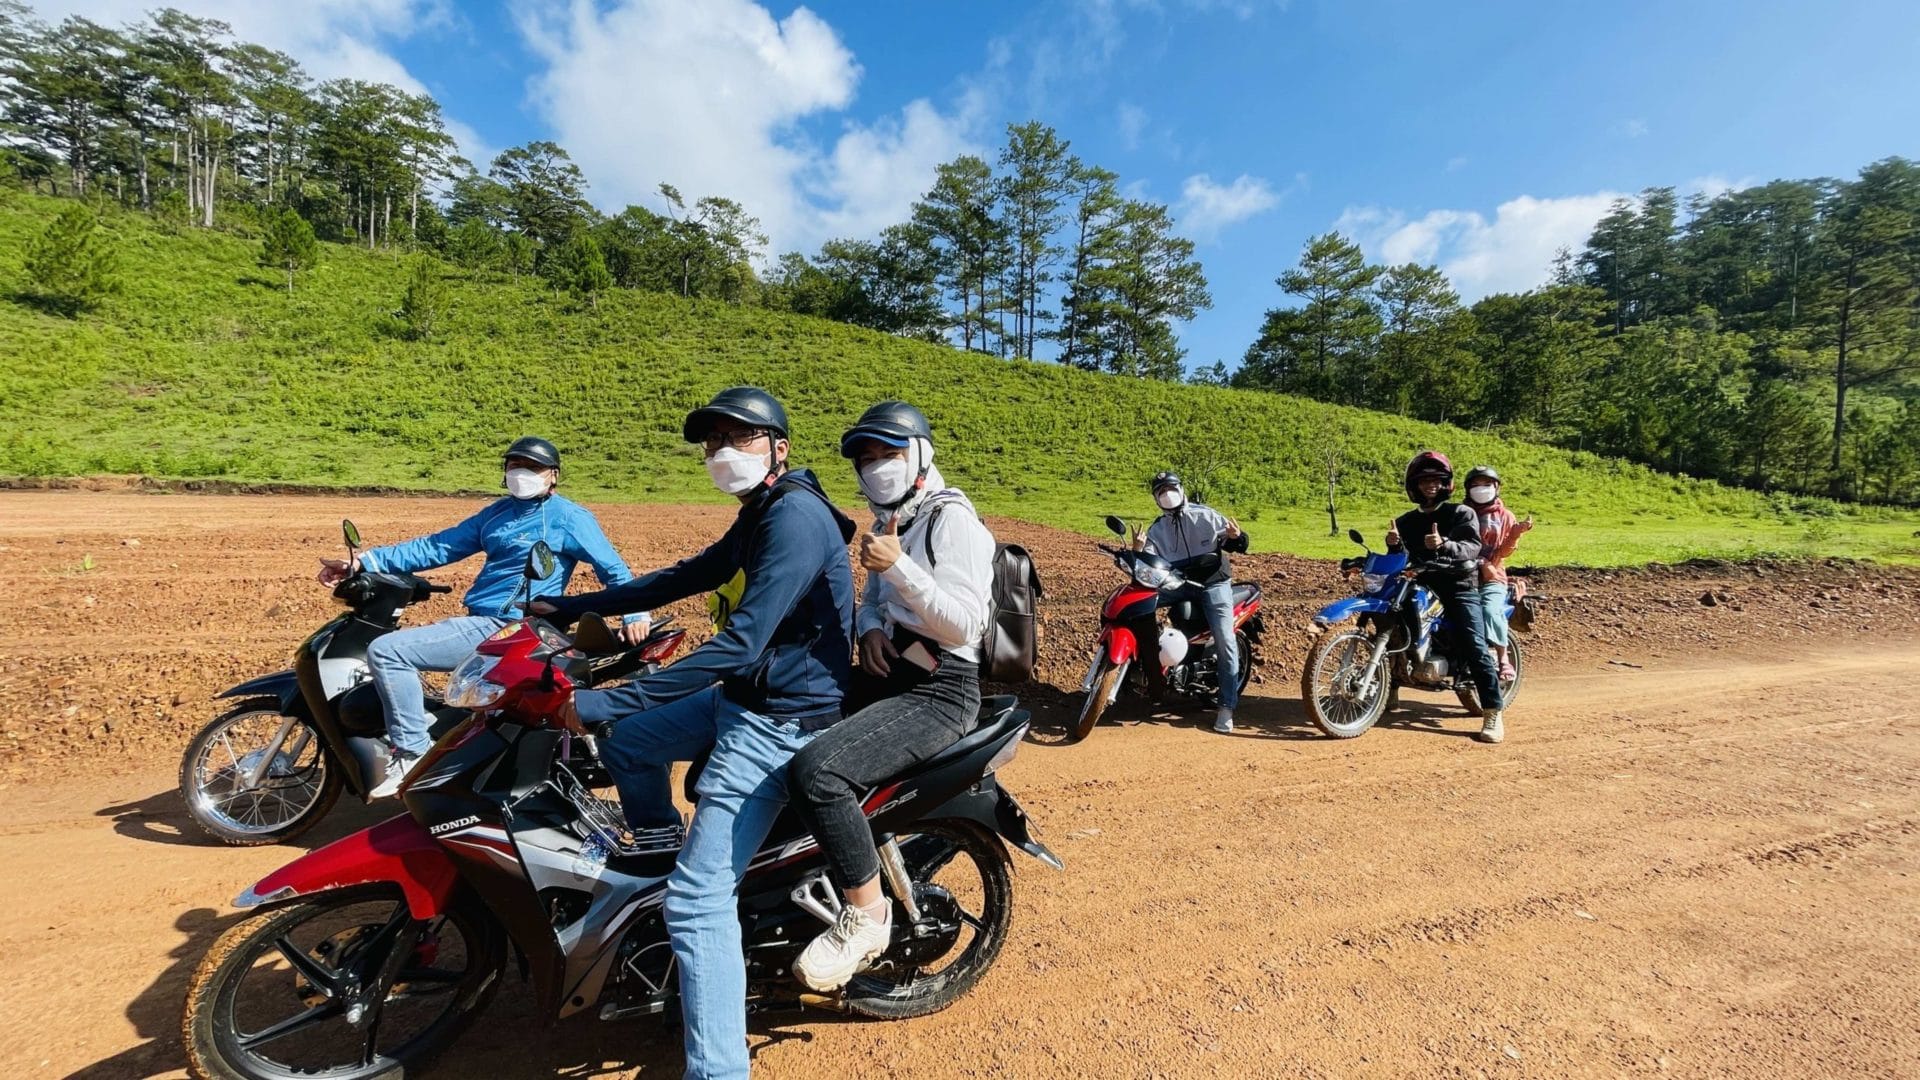 When Is The Best Time To Ride Motorbike From Saigon To Central Highlands To Visit  Nam Cat Tien, Bao Loc, Da Lat, Pleiku, Buon Ma Thuot, Kon Tum?